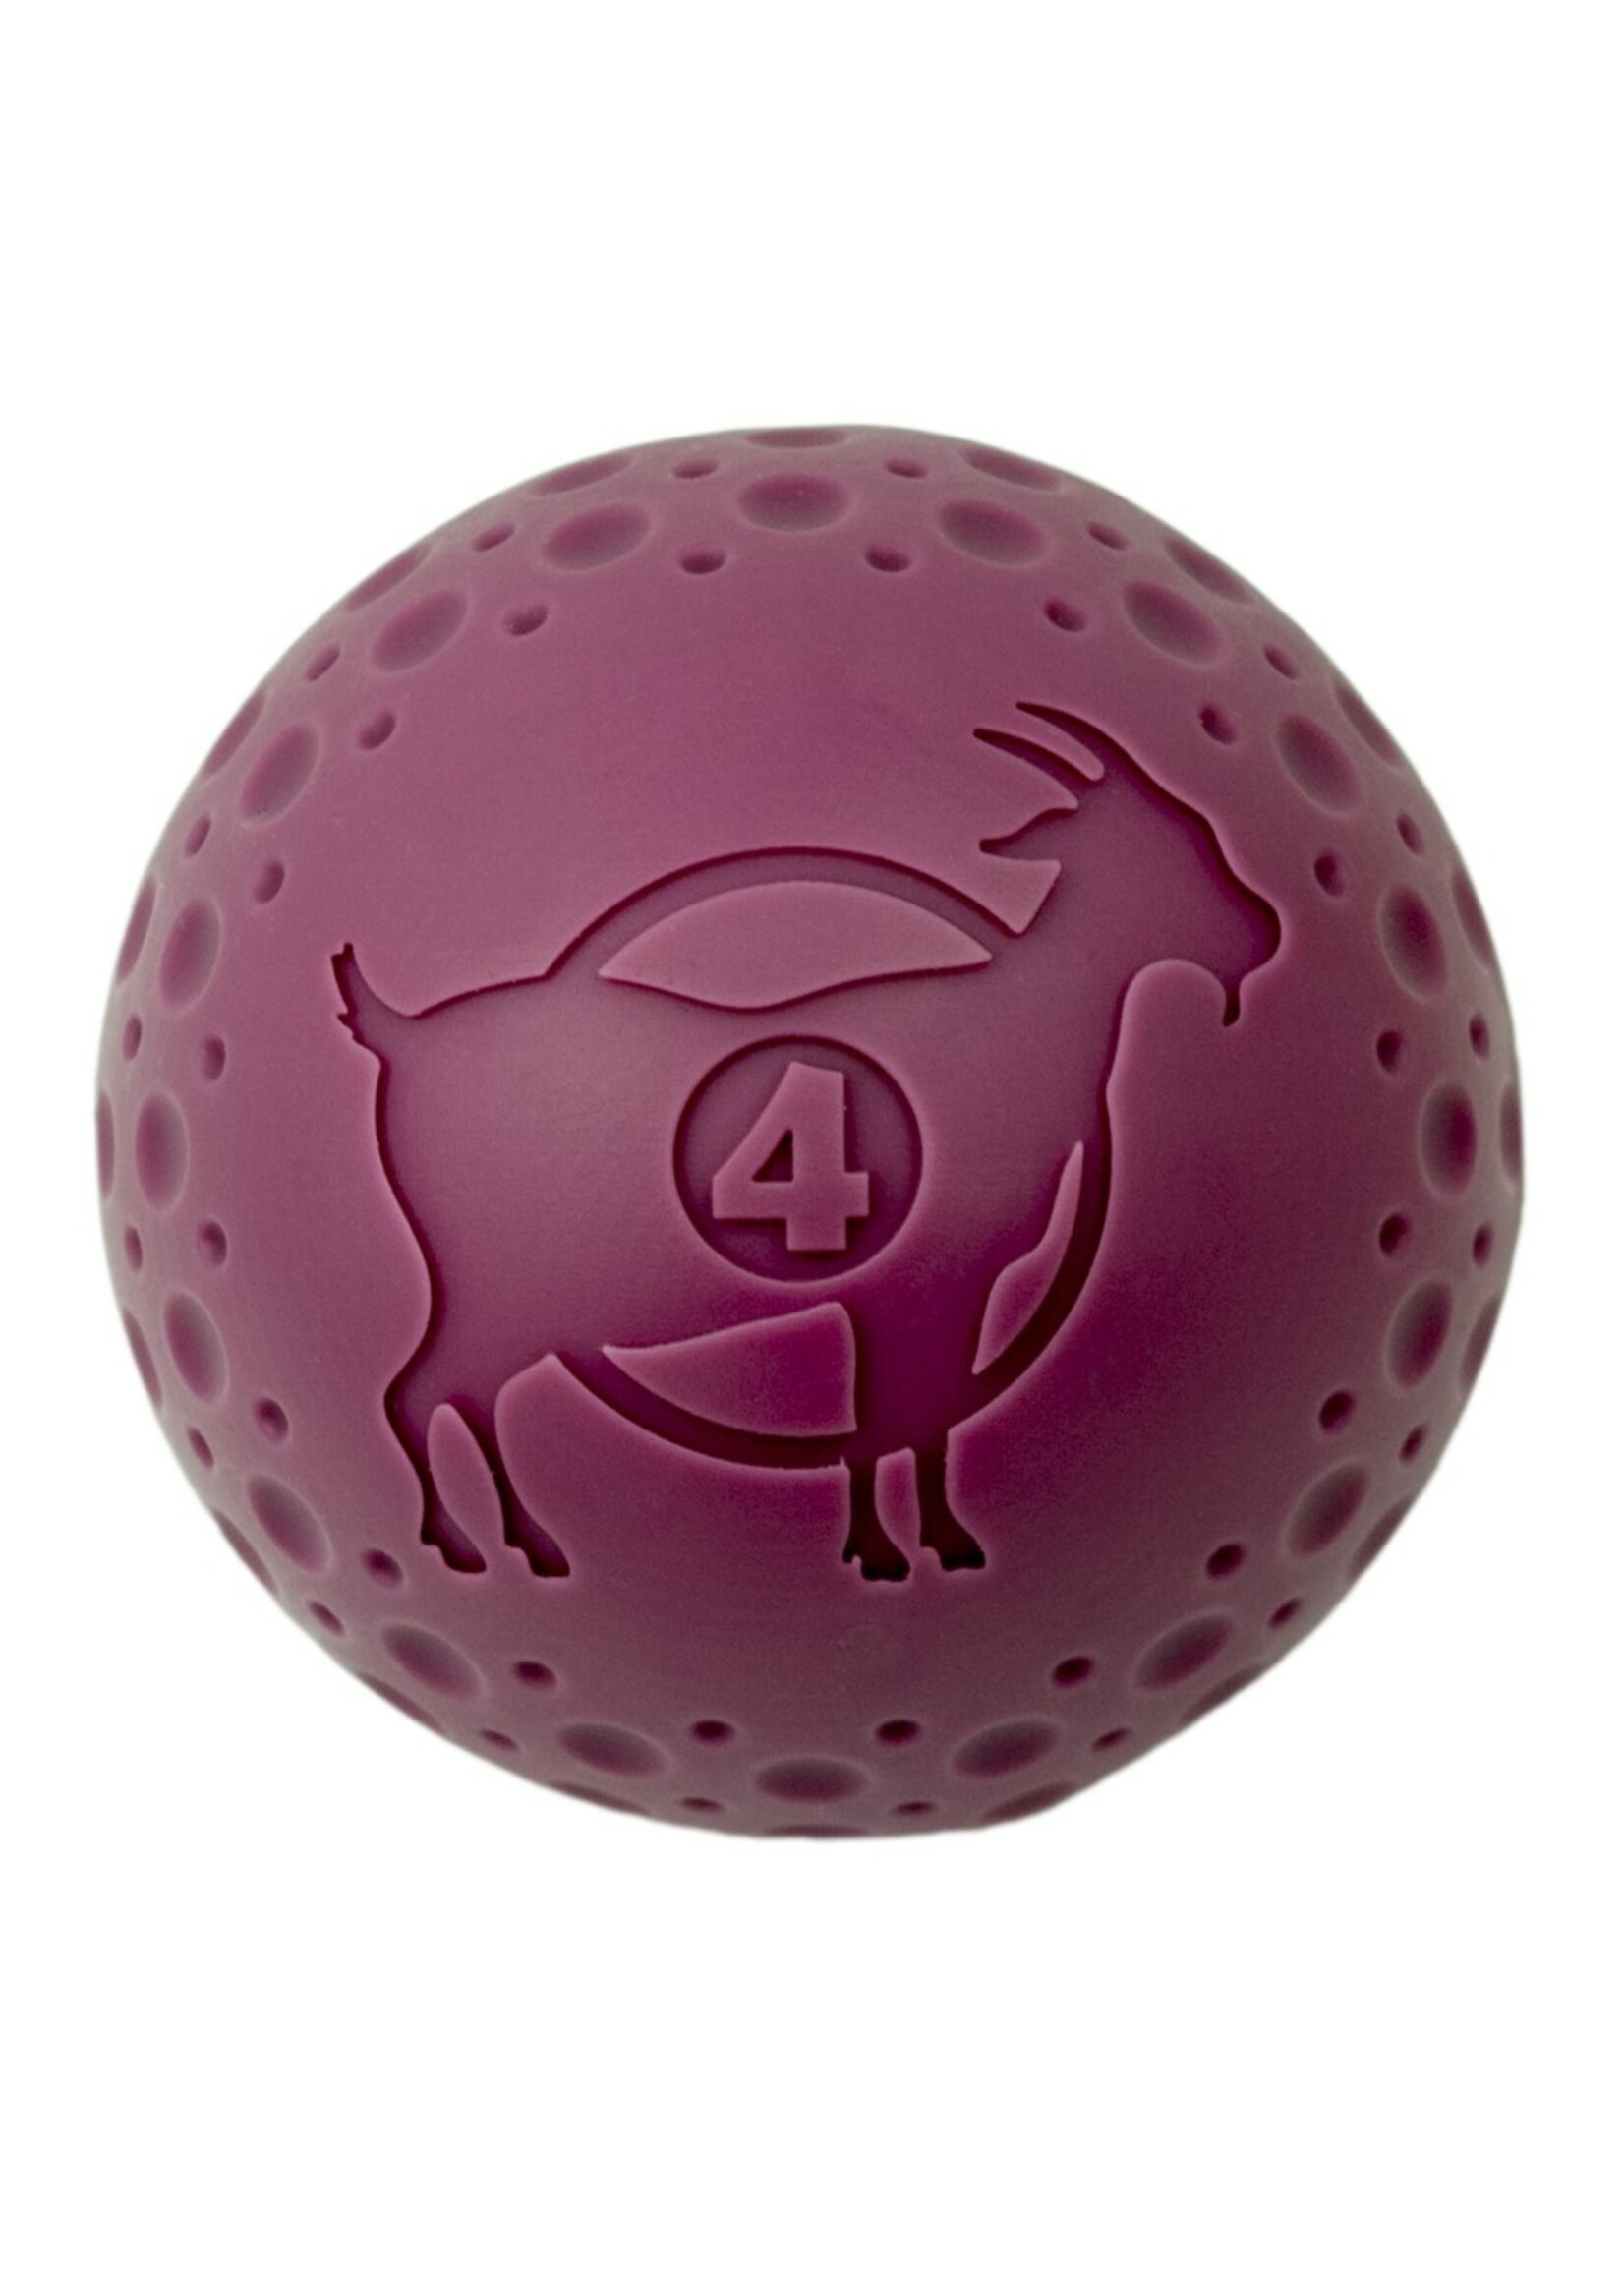 Tall Tails Tall Tails Goat Ball Large Purple 4"